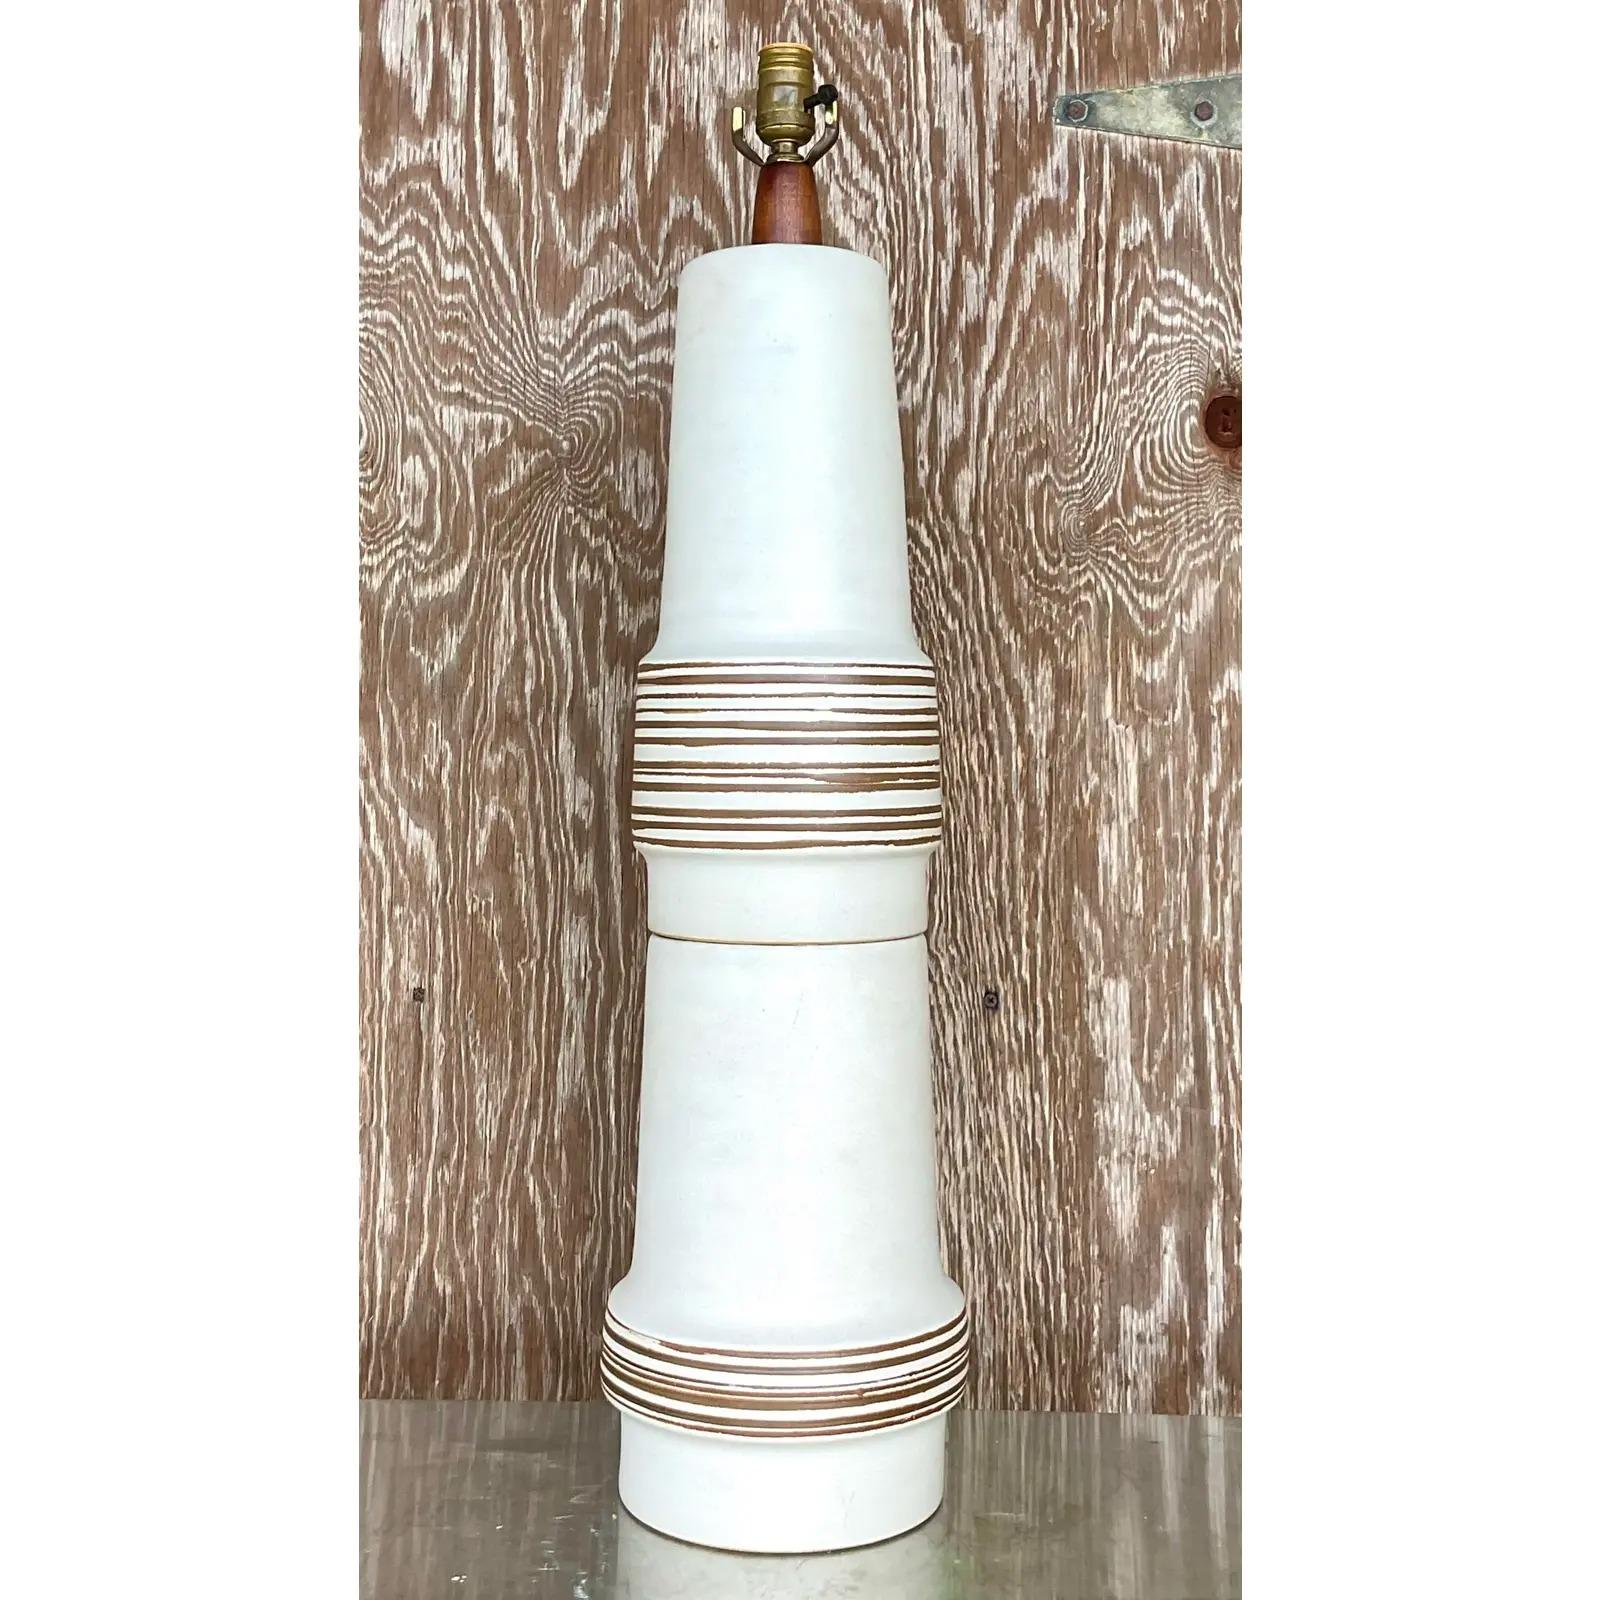 North American Vintage Midcentury Martz Signed Stacked Ceramic Table Lamp For Sale